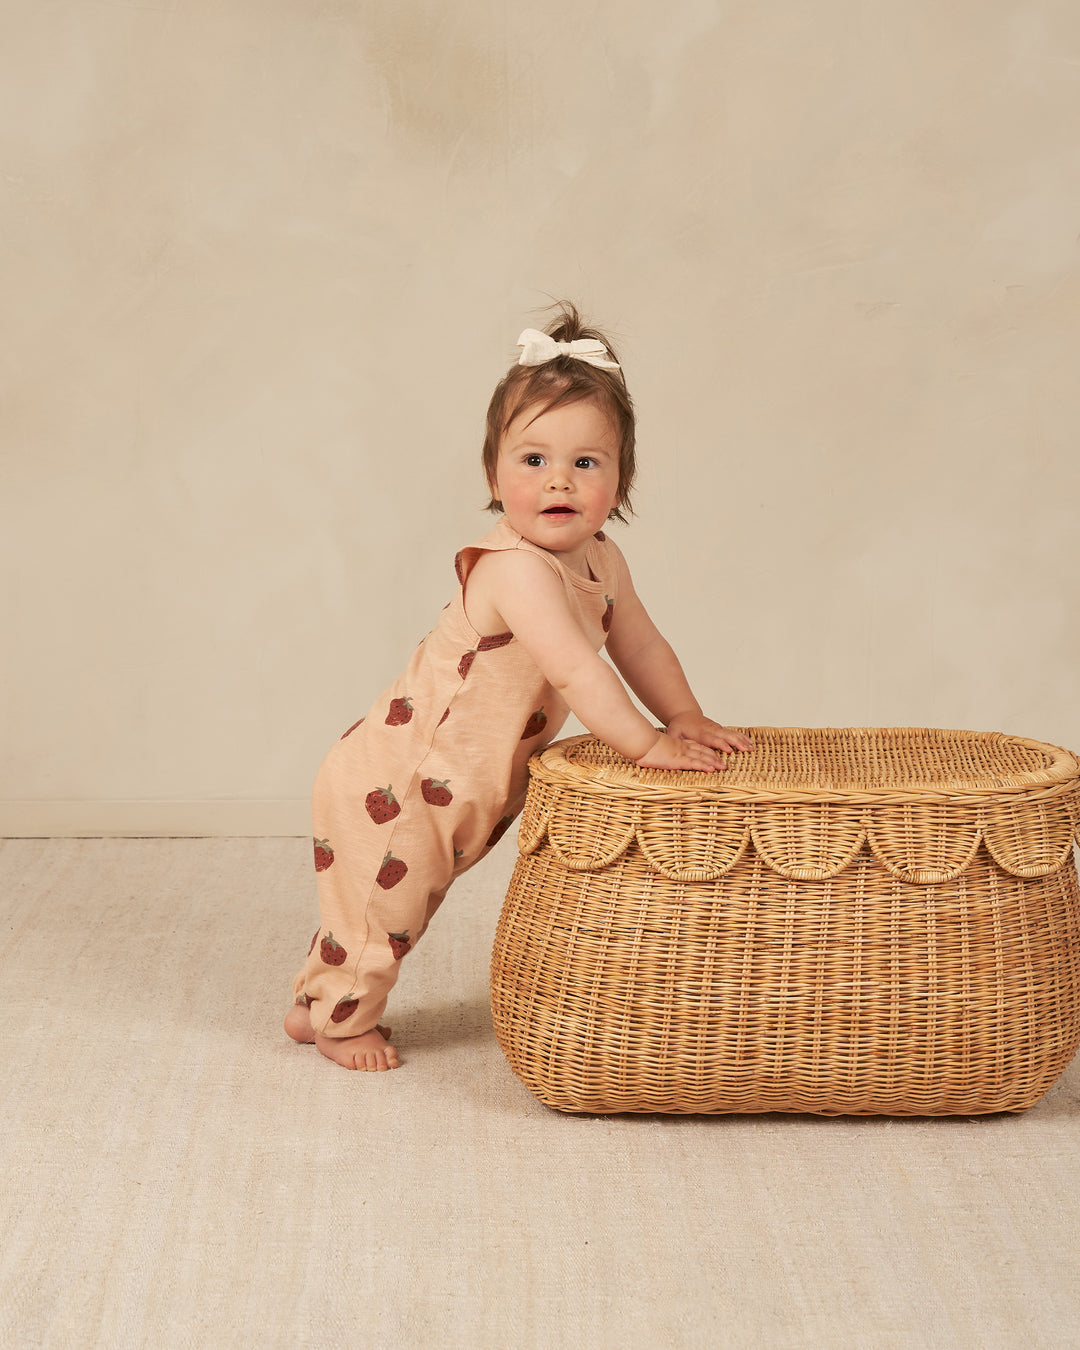 Strawberry Mills Jumpsuit by Rylee and Cru